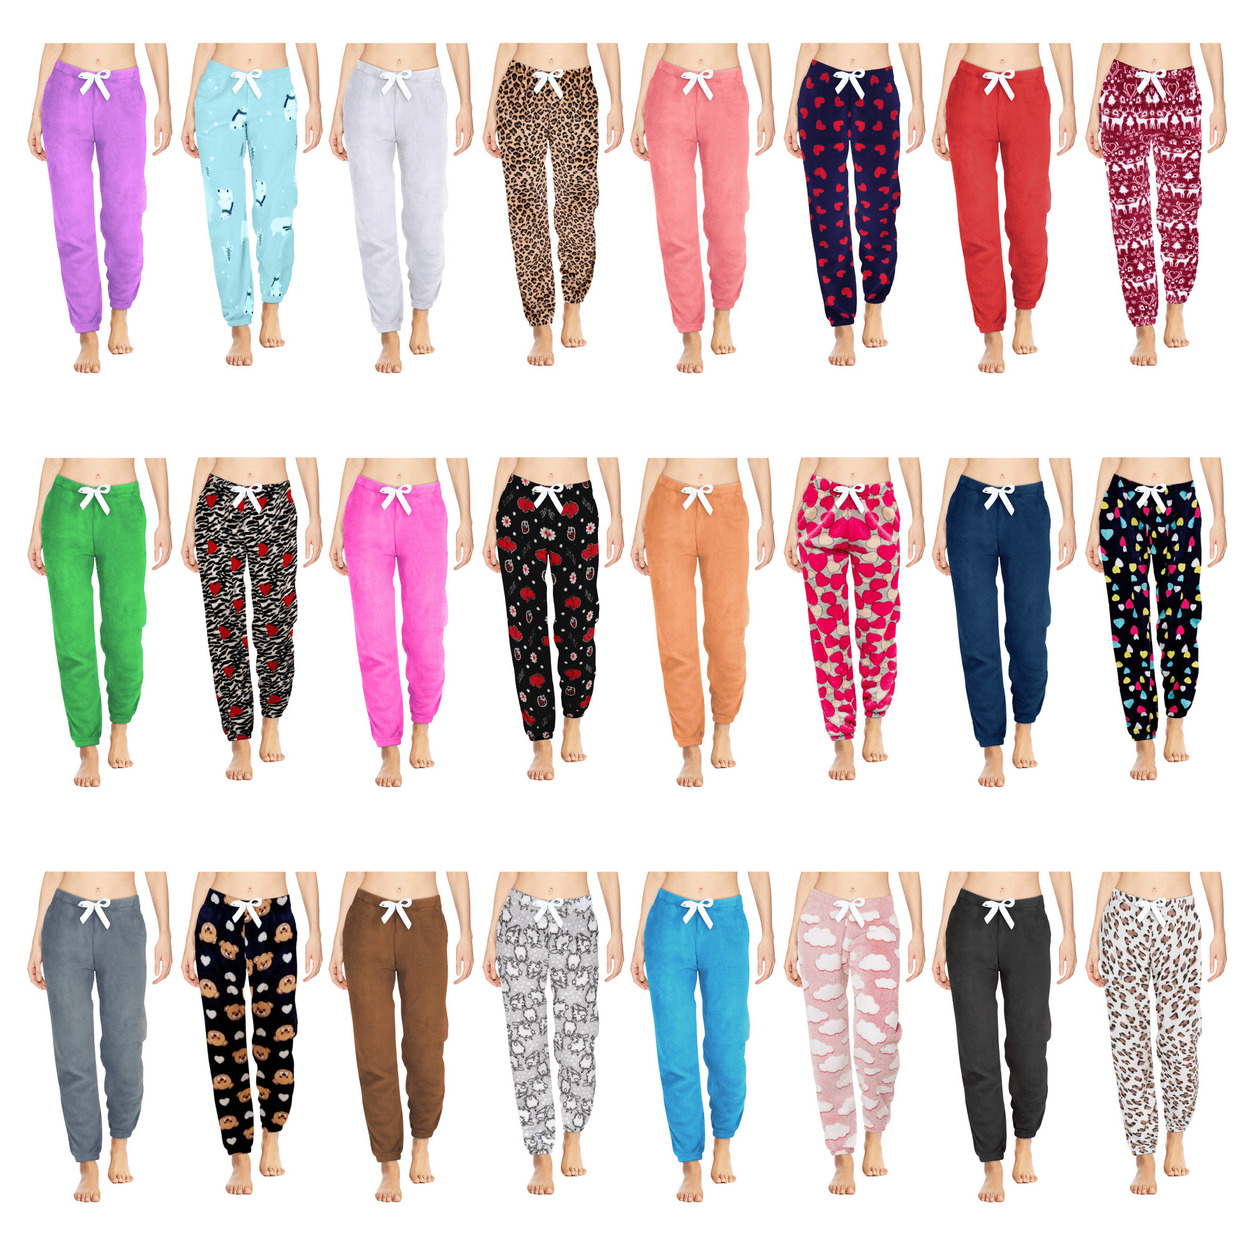 Multi-Pack: Women's Solid & Printed Ultra-Soft Comfy Stretch Micro-Fleece Pajama Lounge Pants - 1-pack, Medium, Love